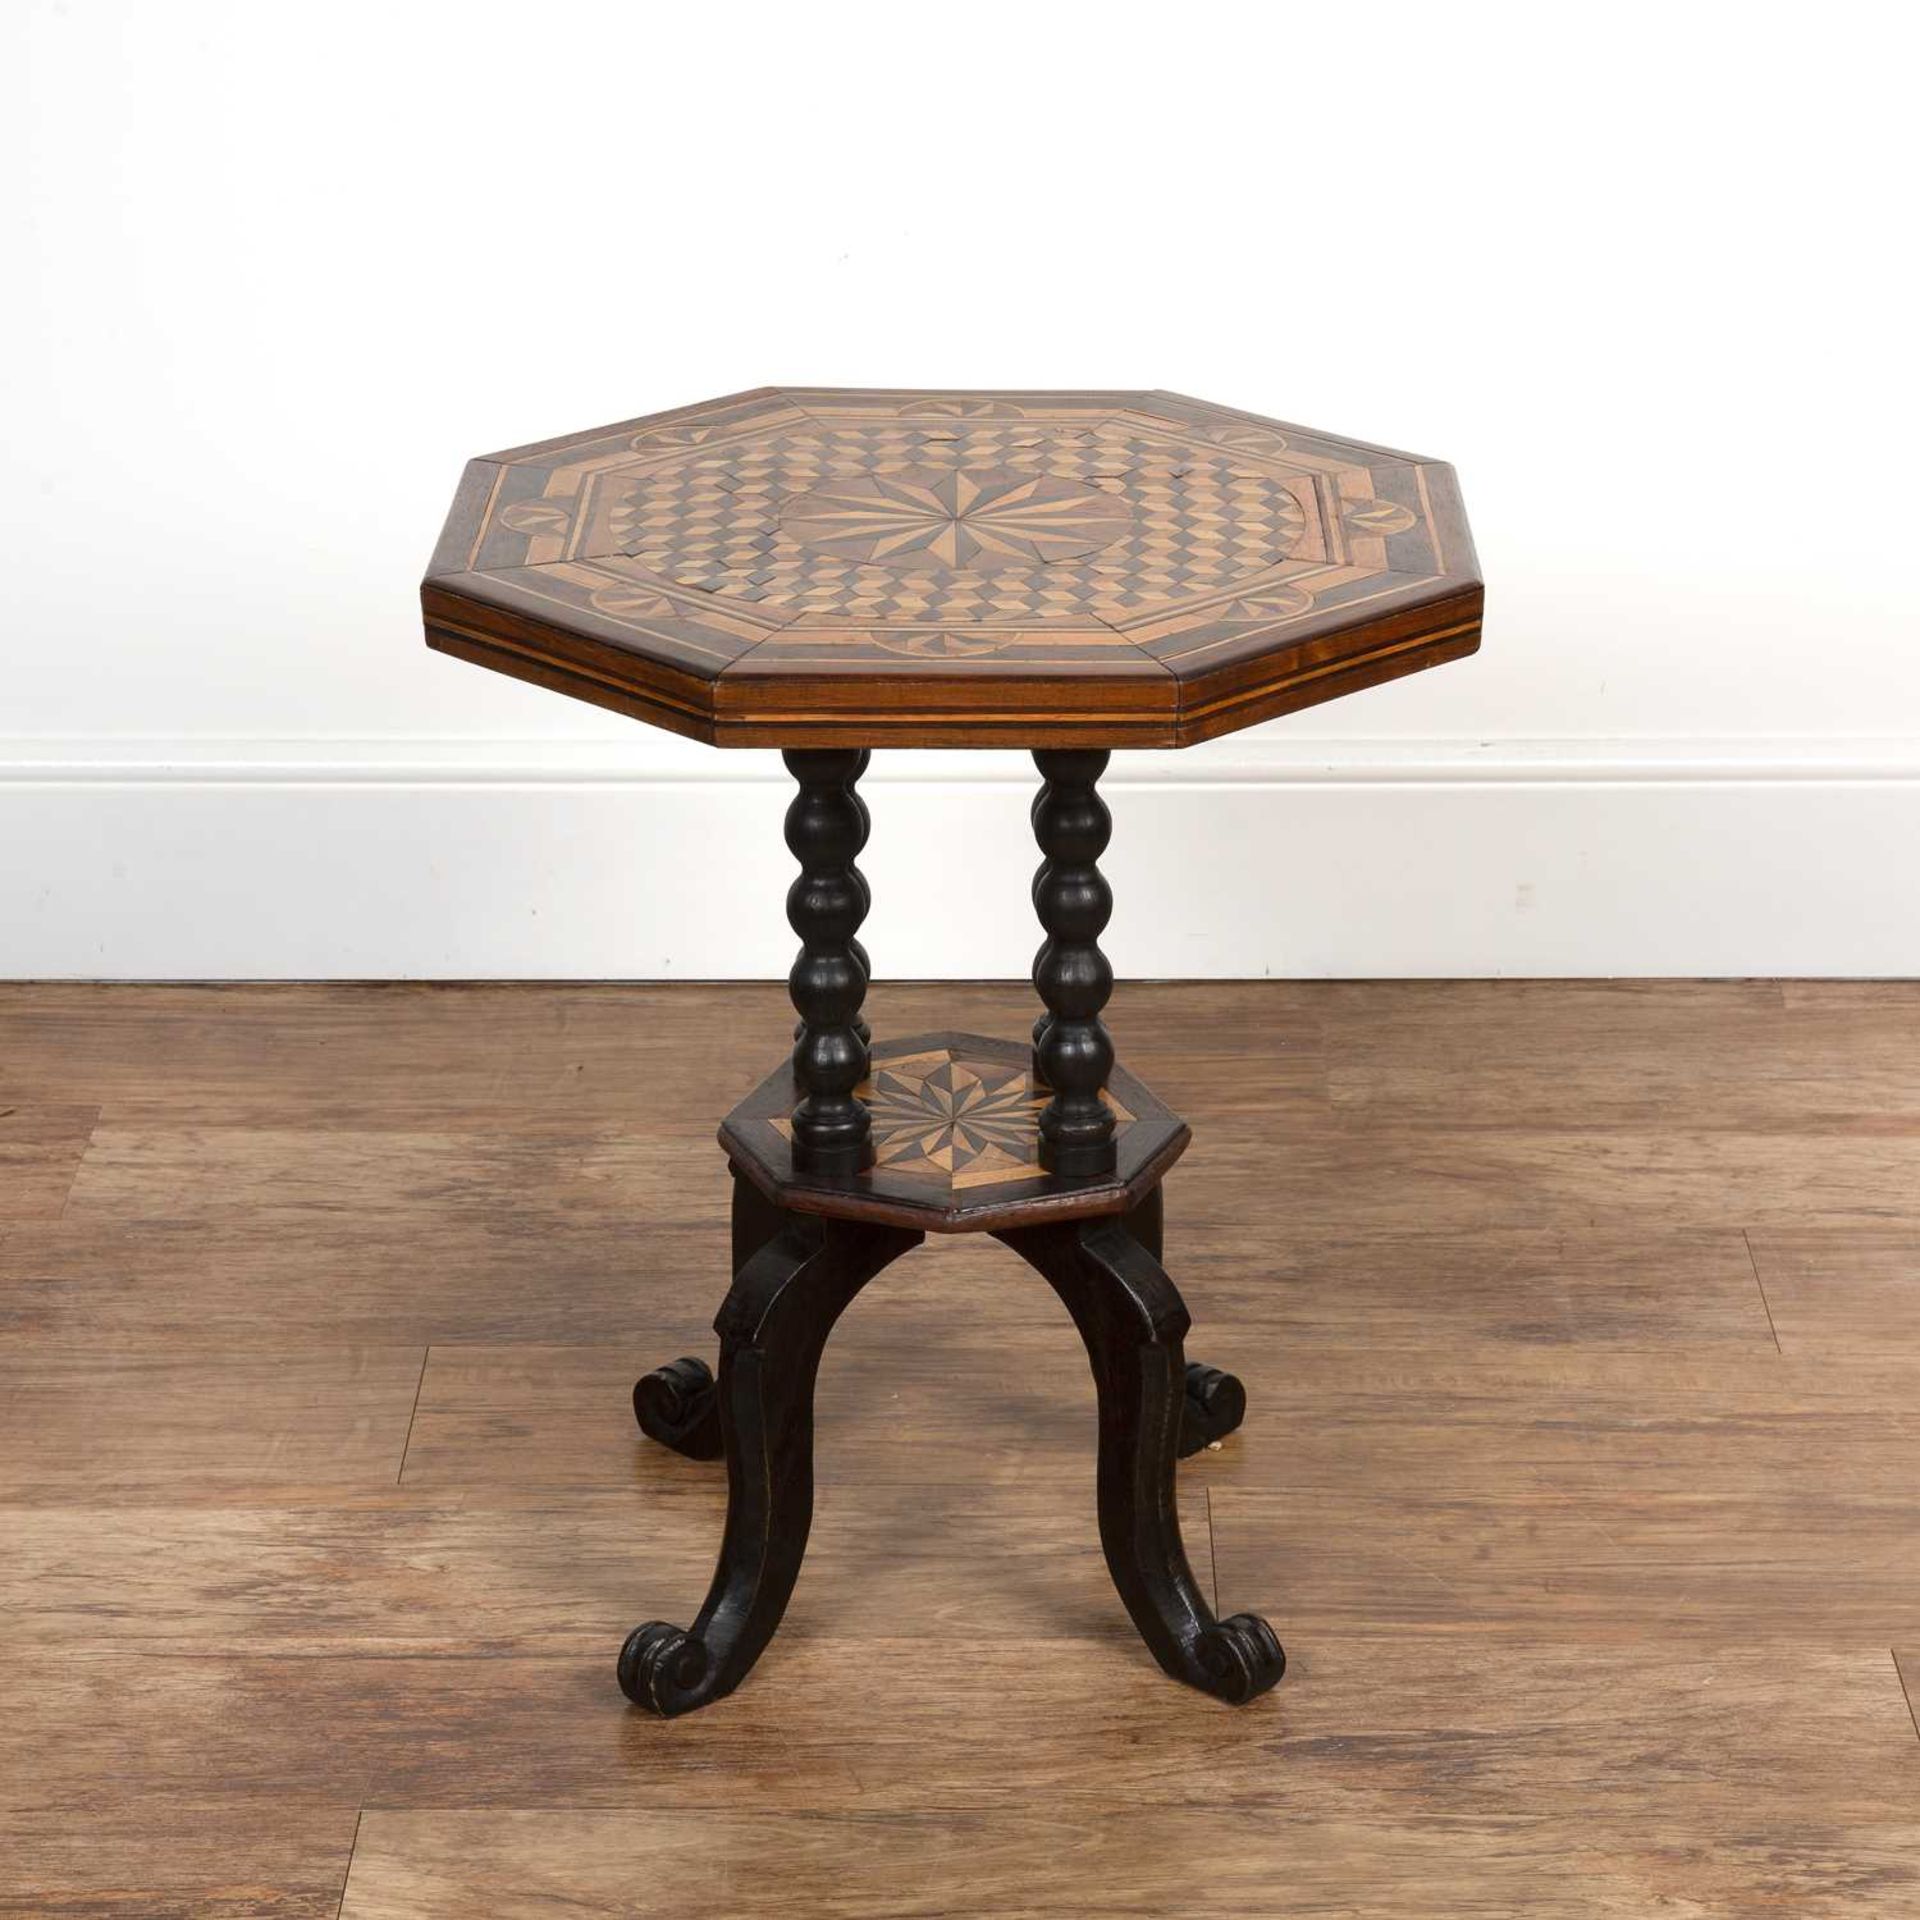 Mahogany marquetry inlaid tilt top table 19th Century, the hexagonal top with tumbling block